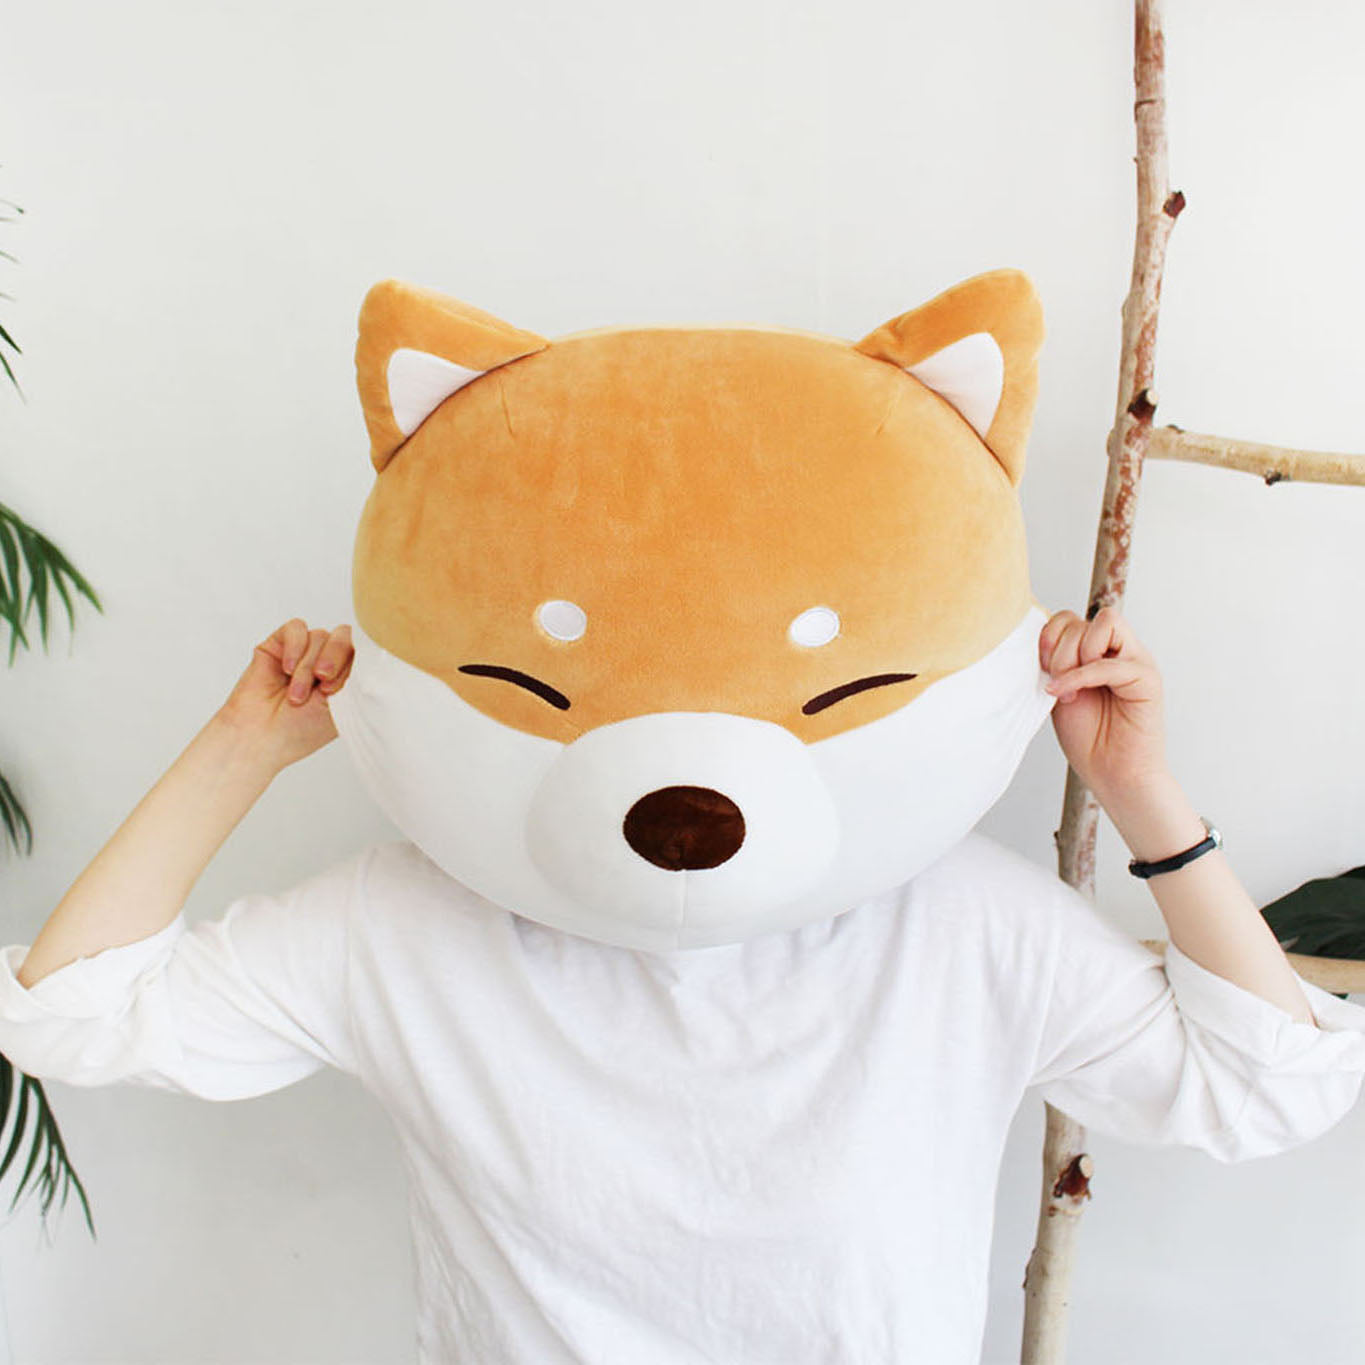 Model is holding the shiba face cushion in front of their face beside a birch ladder and a palm plant.